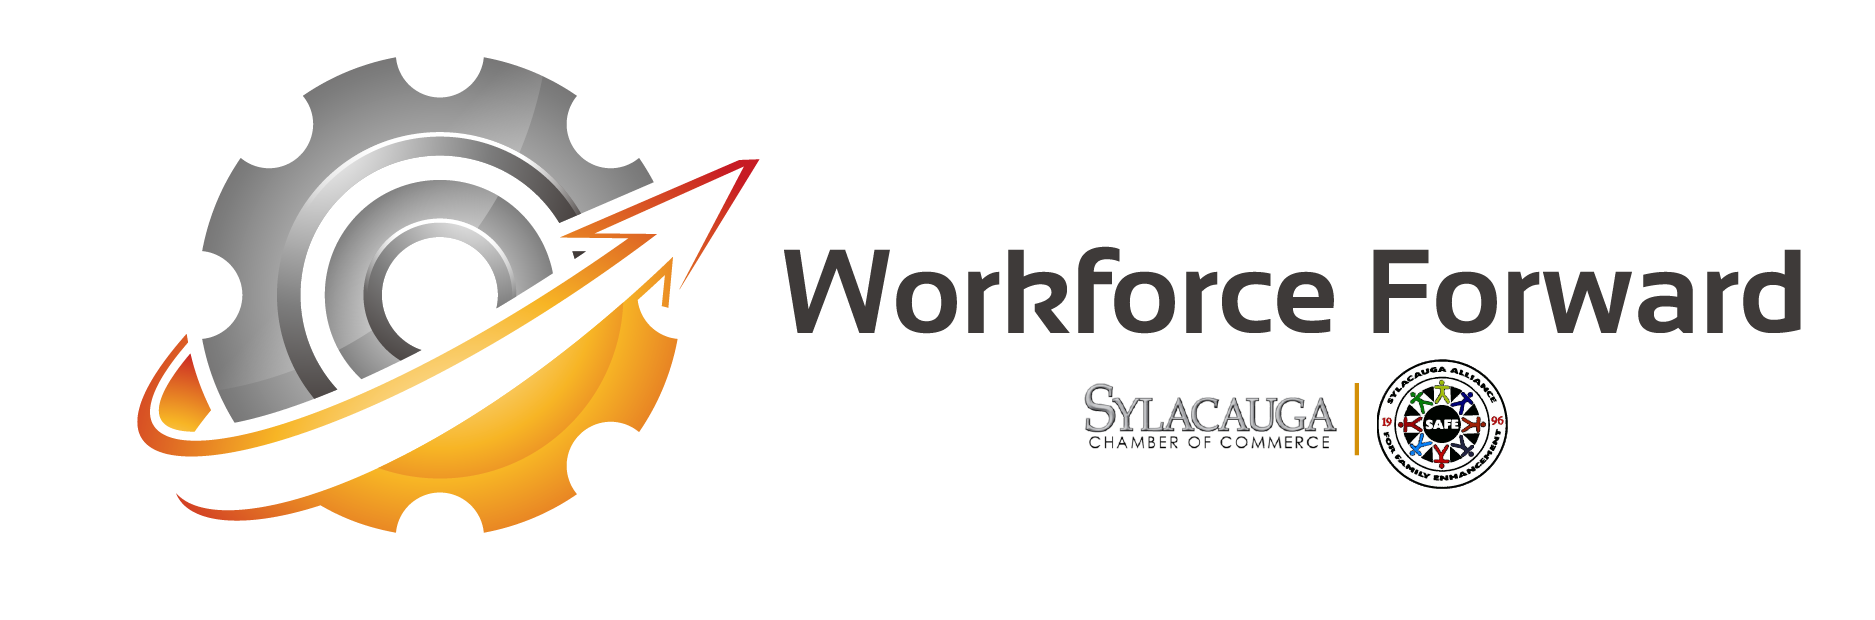 Workforce Forward logo template 2 with chamber safe logos-01